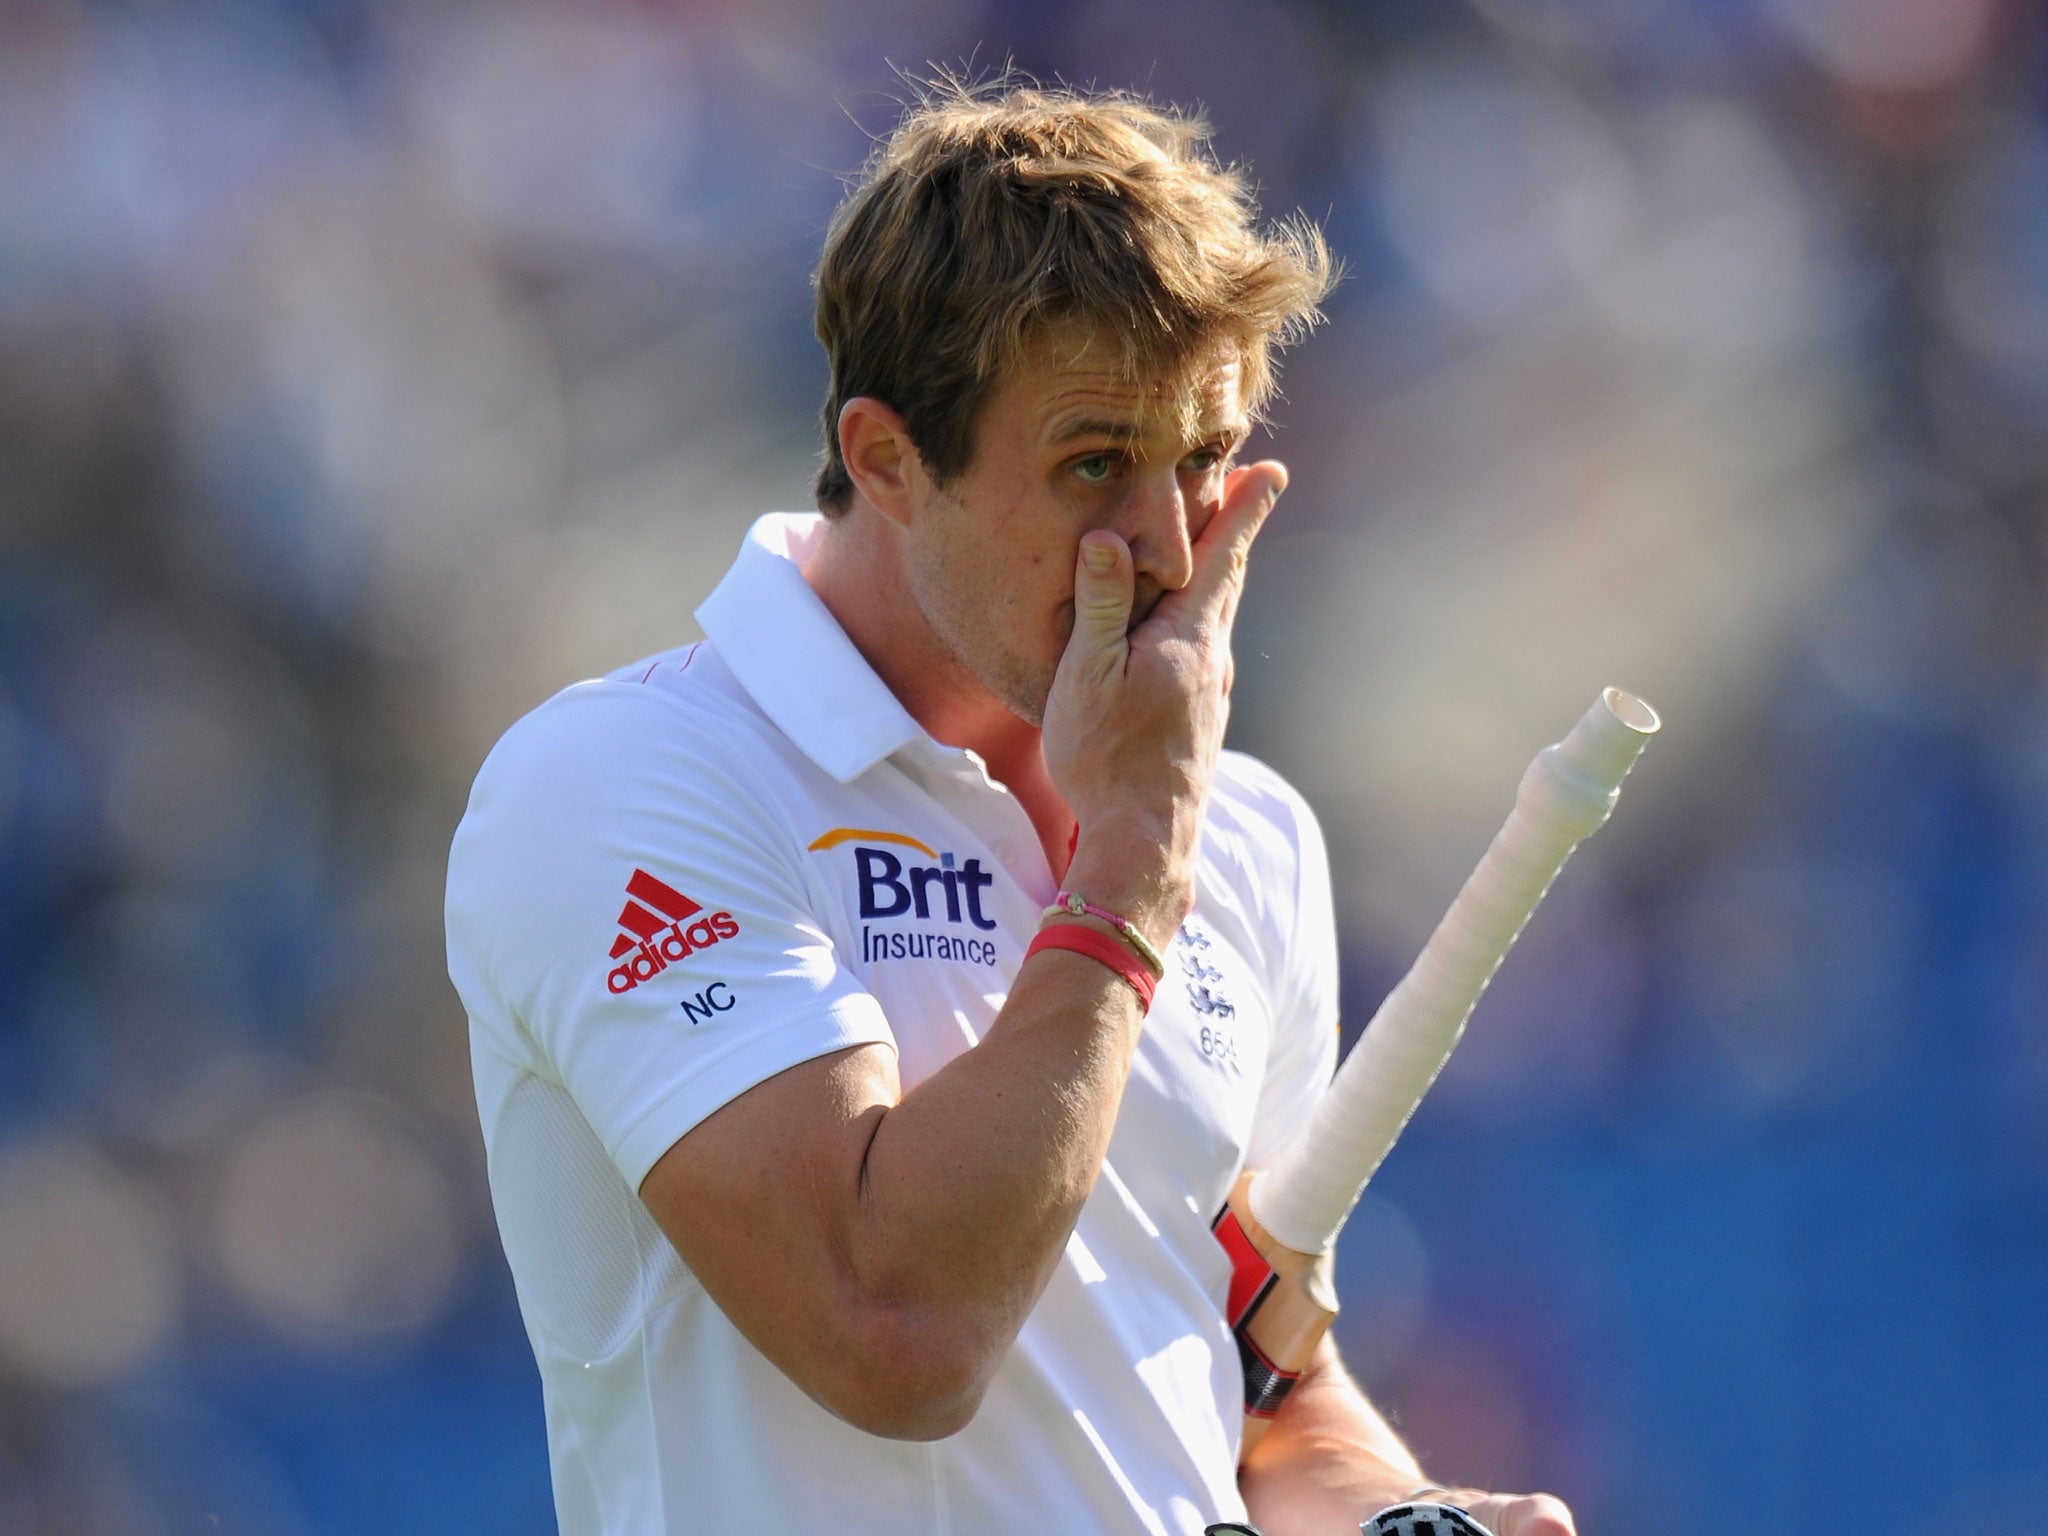 Opening batsman Nick Compton is hopeful of an England recall after their recent batting collapses in the Ashes series defeat